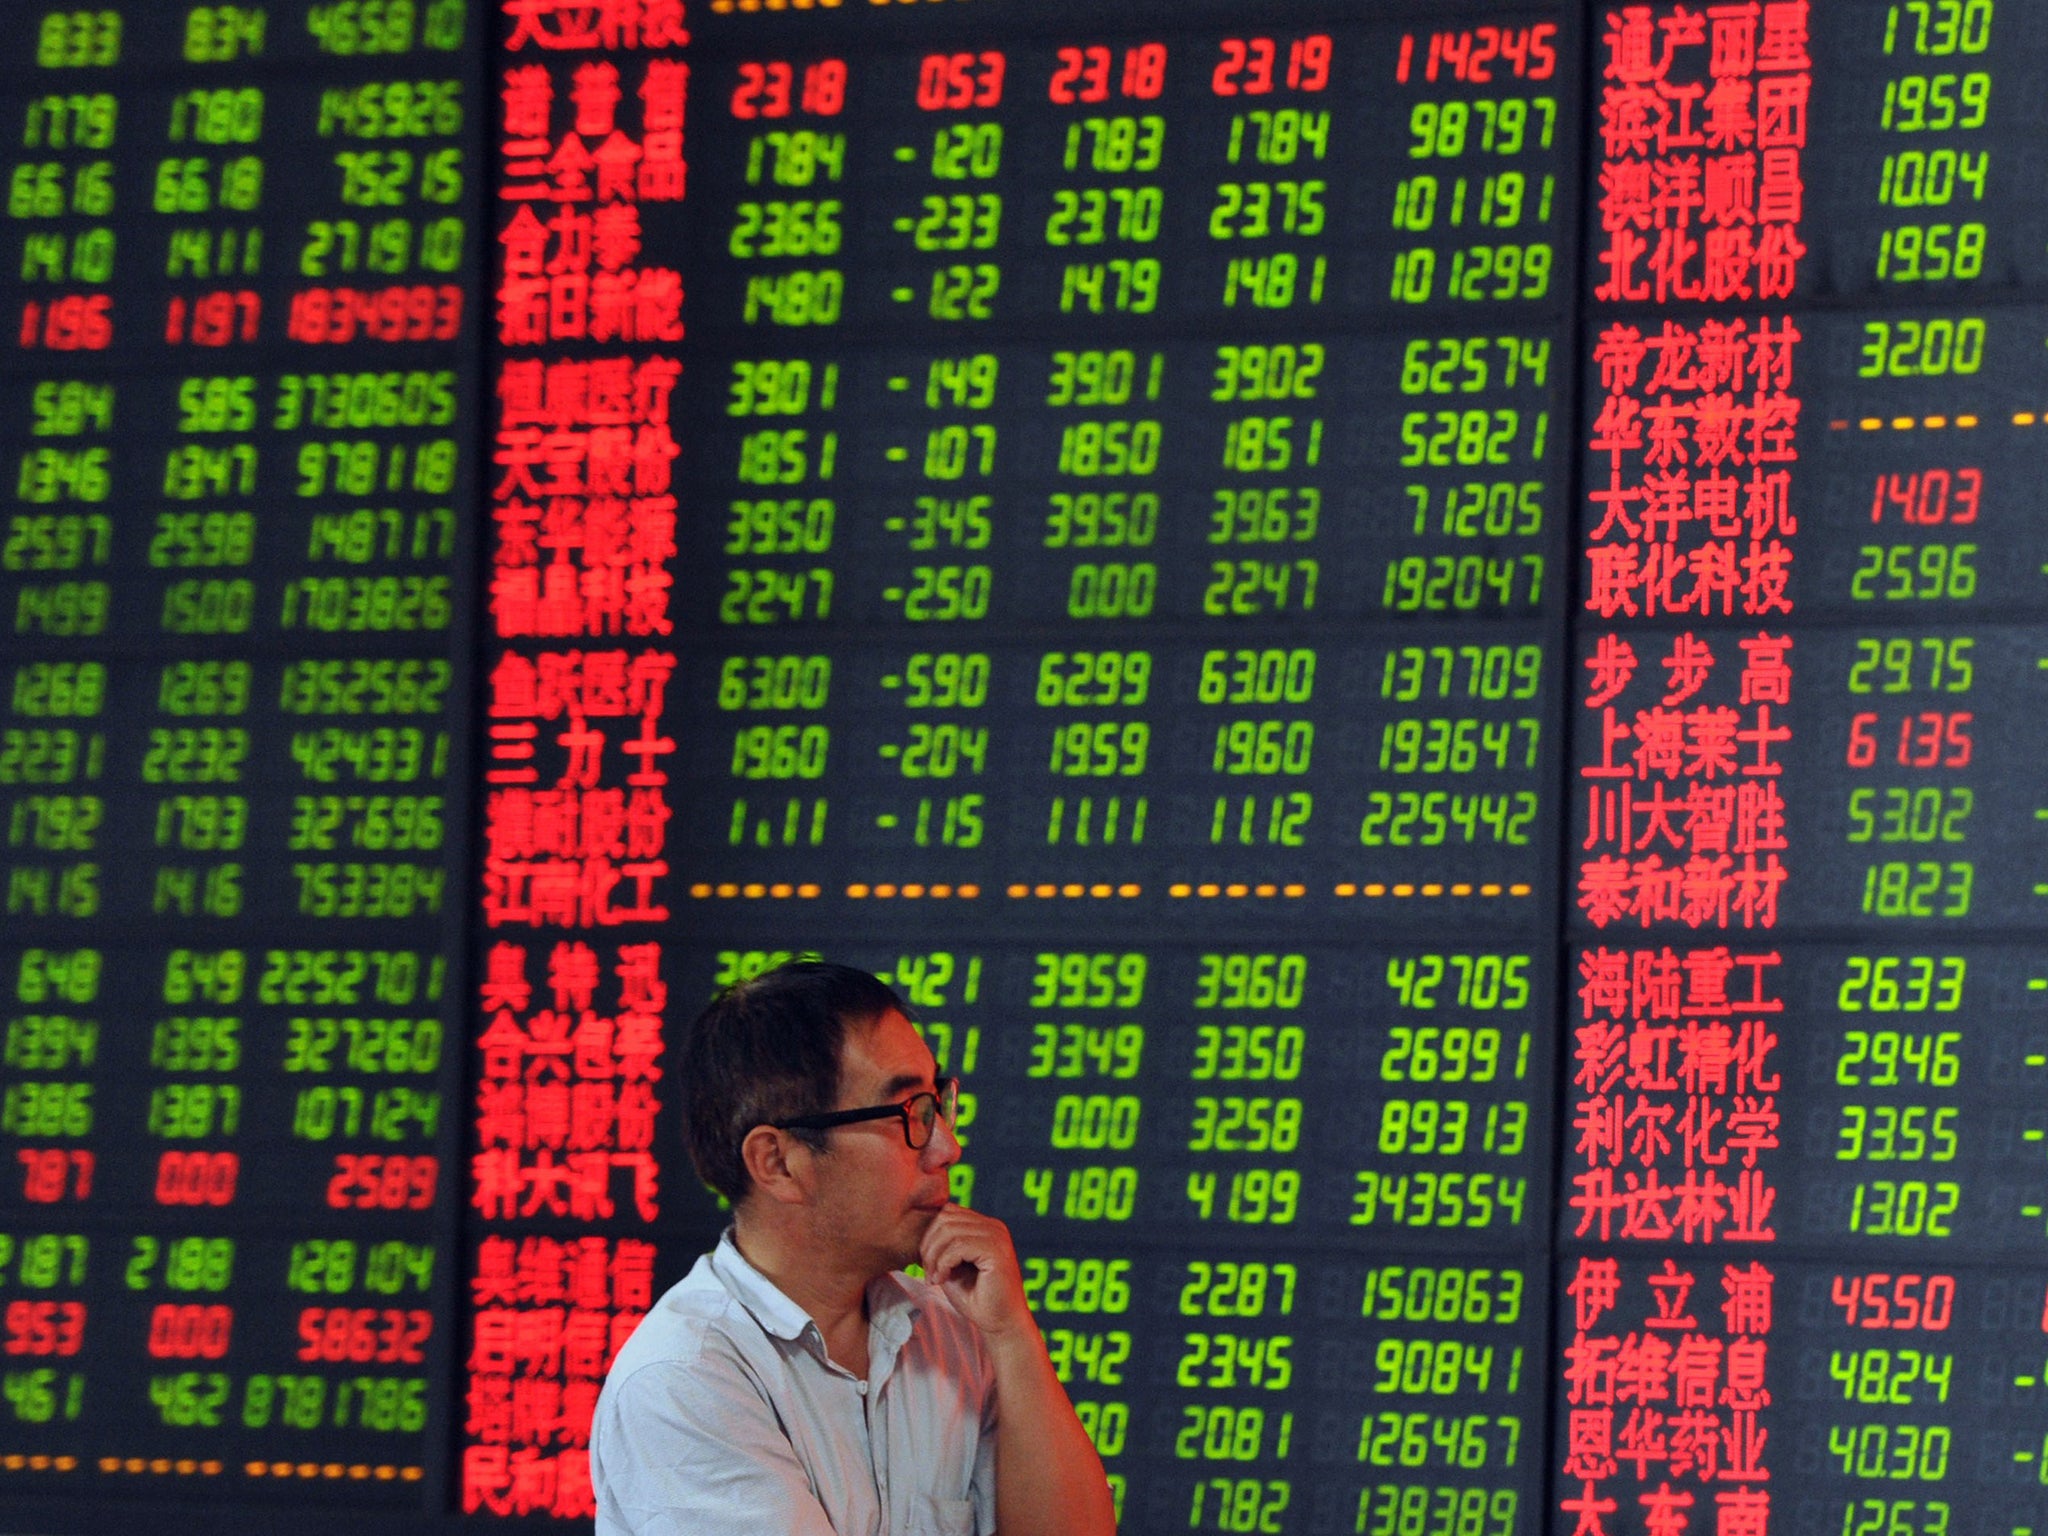 China's financial watchdog has begun an inquiry into suspected illegal stock market manipulation